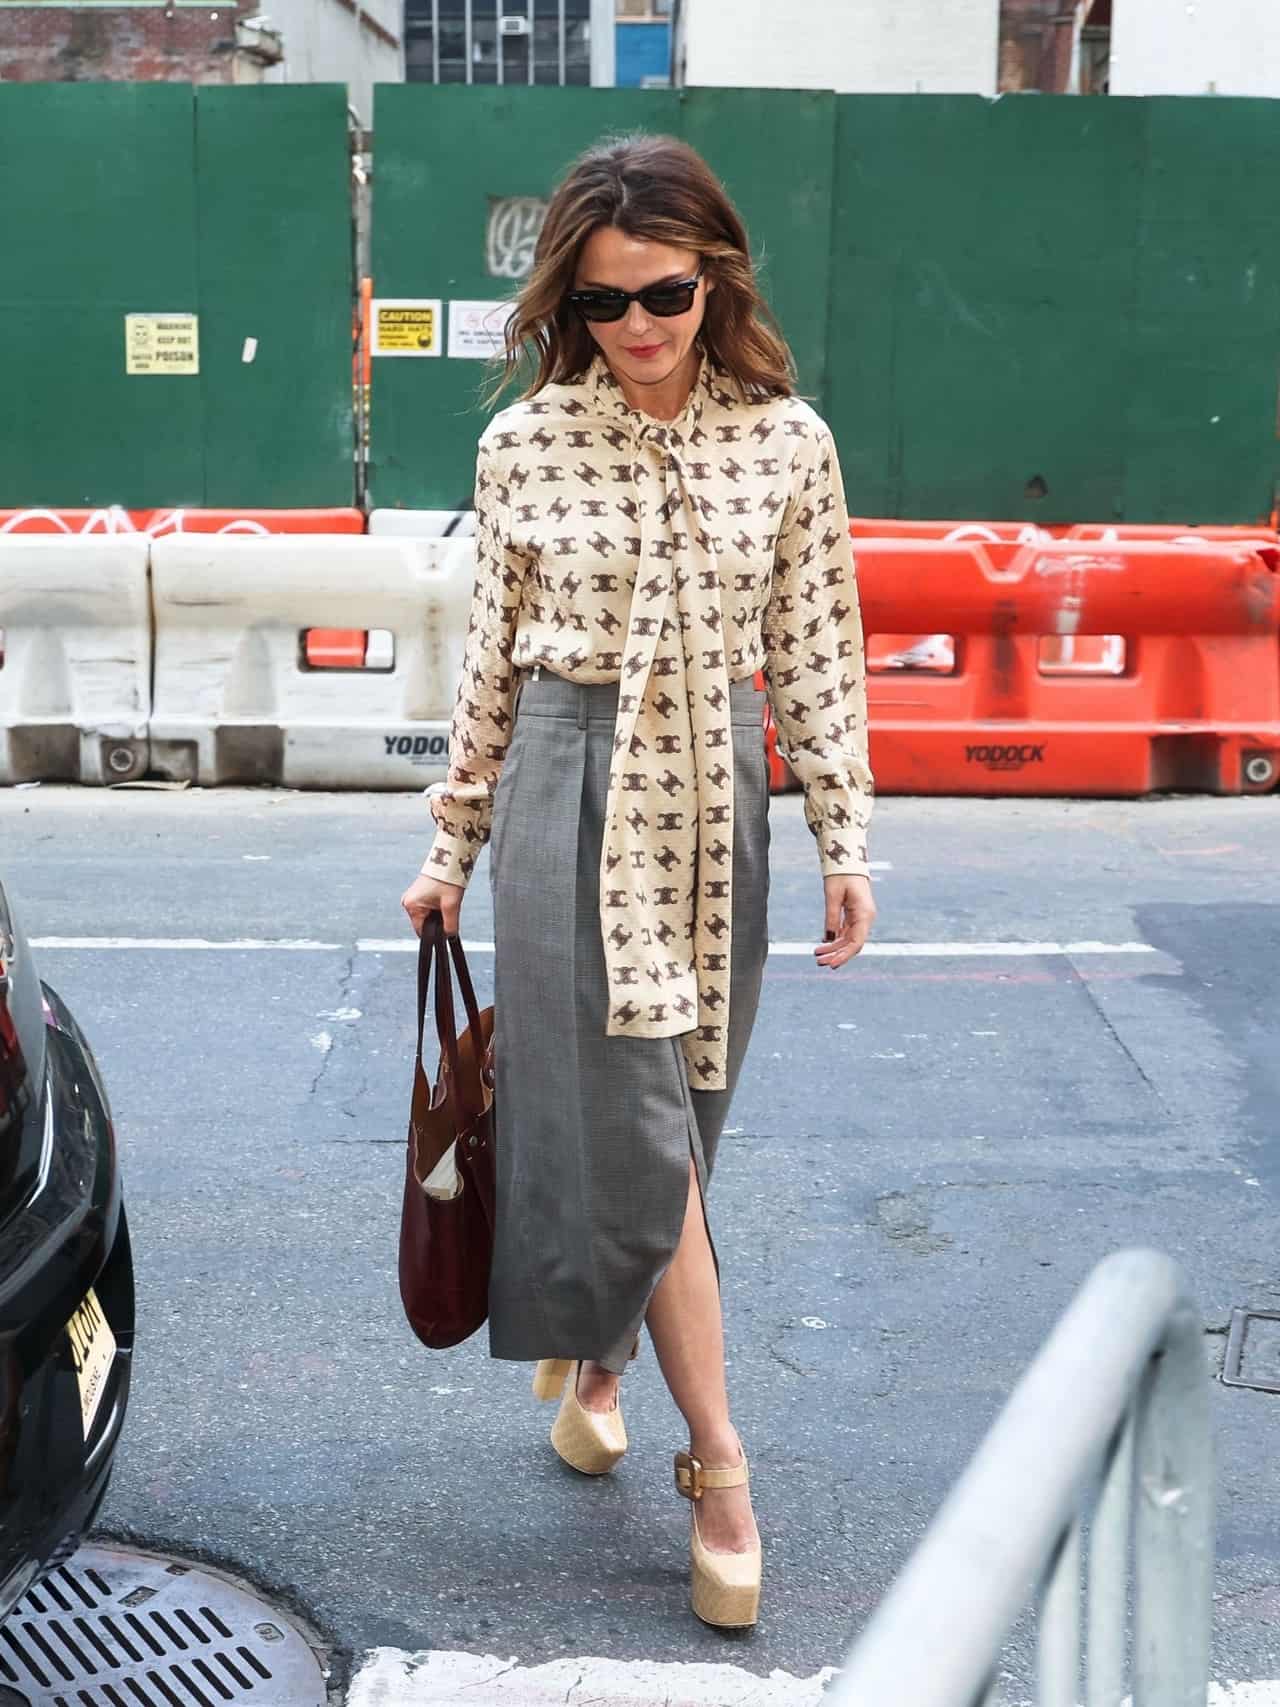 Keri Russell Promotes The Diplomat in Chic Style at Today Studios NYC